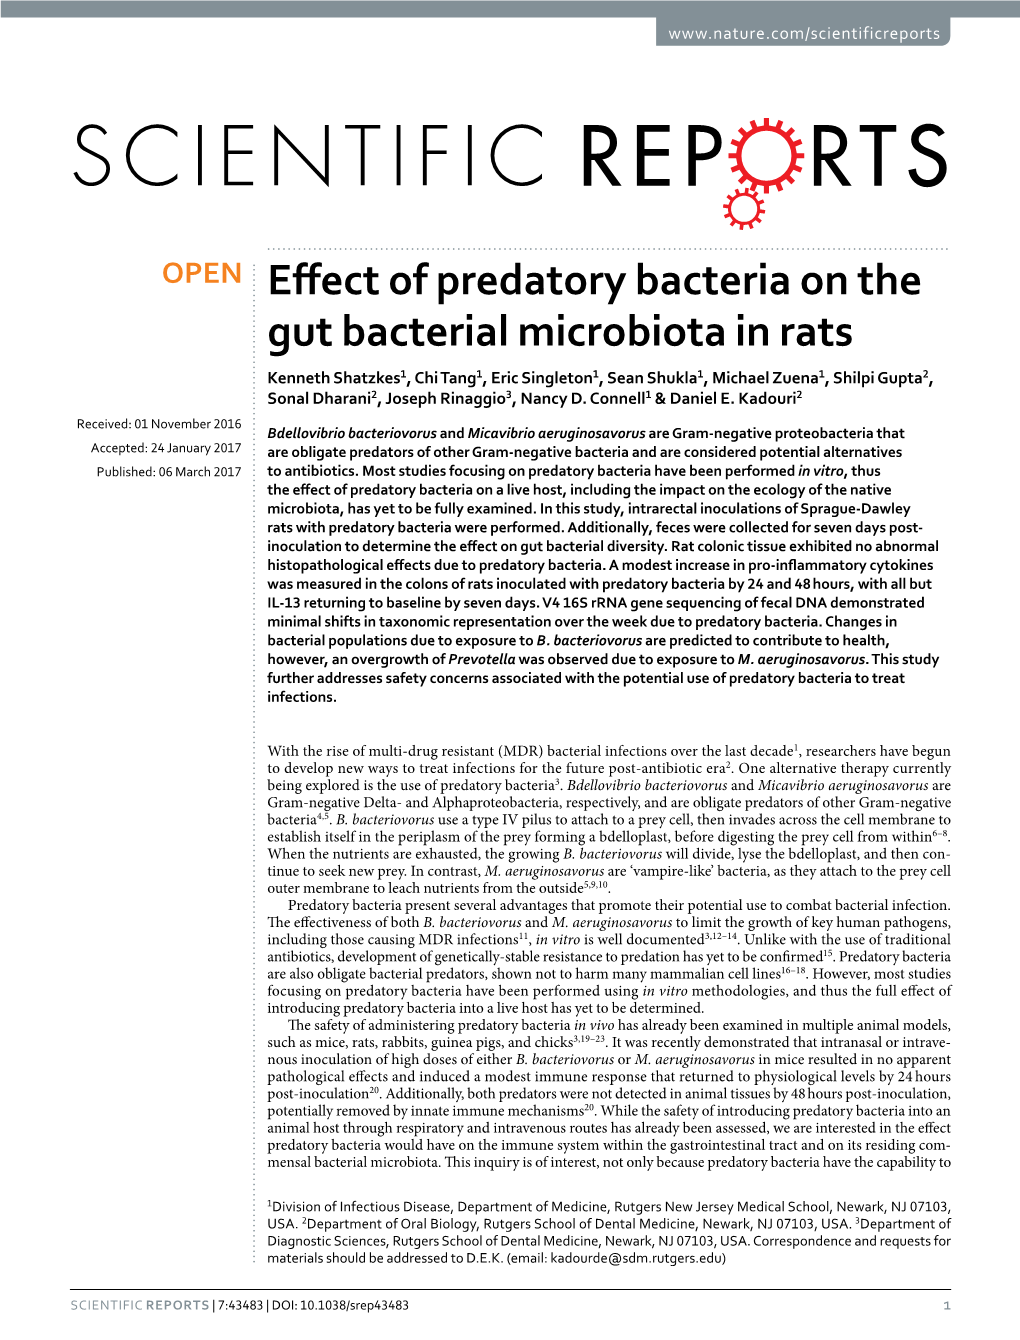 Effect of Predatory Bacteria on the Gut Bacterial Microbiota in Rats